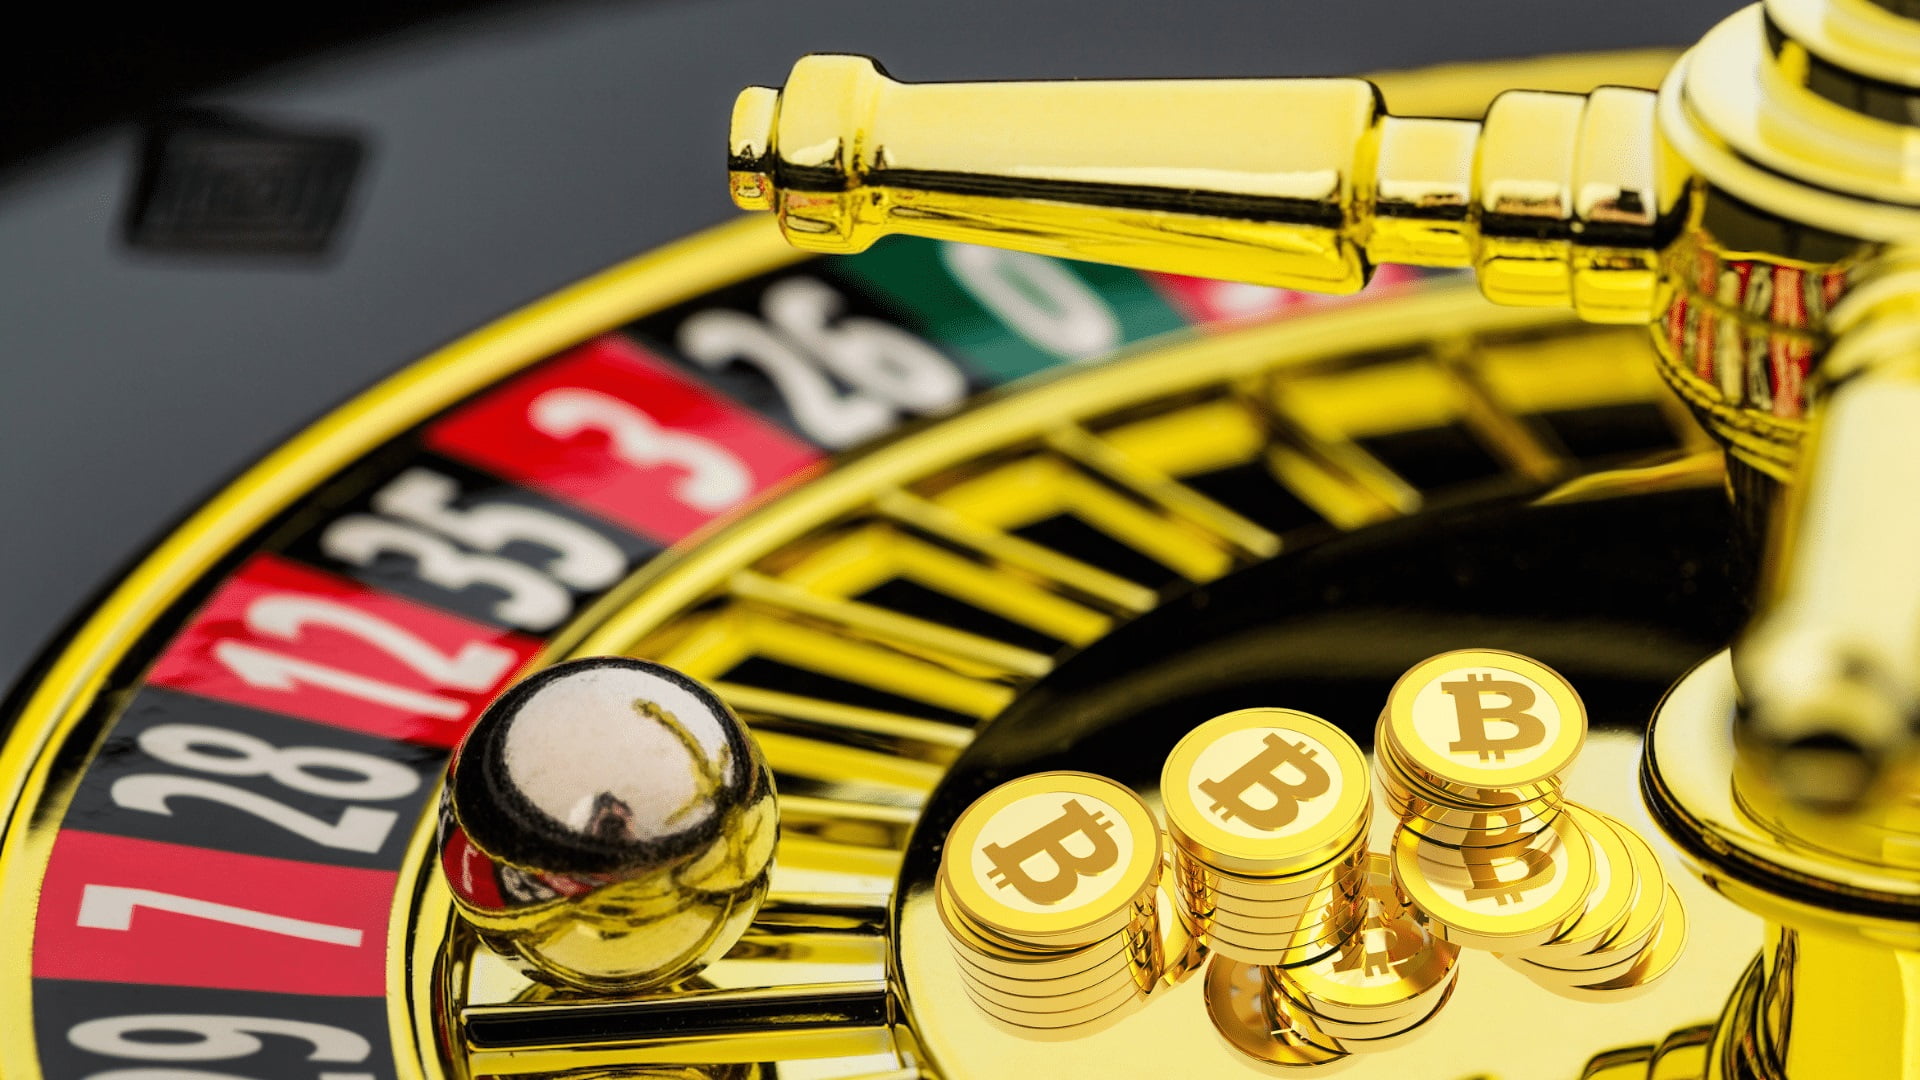 online gambling bitcoin - Are You Prepared For A Good Thing?